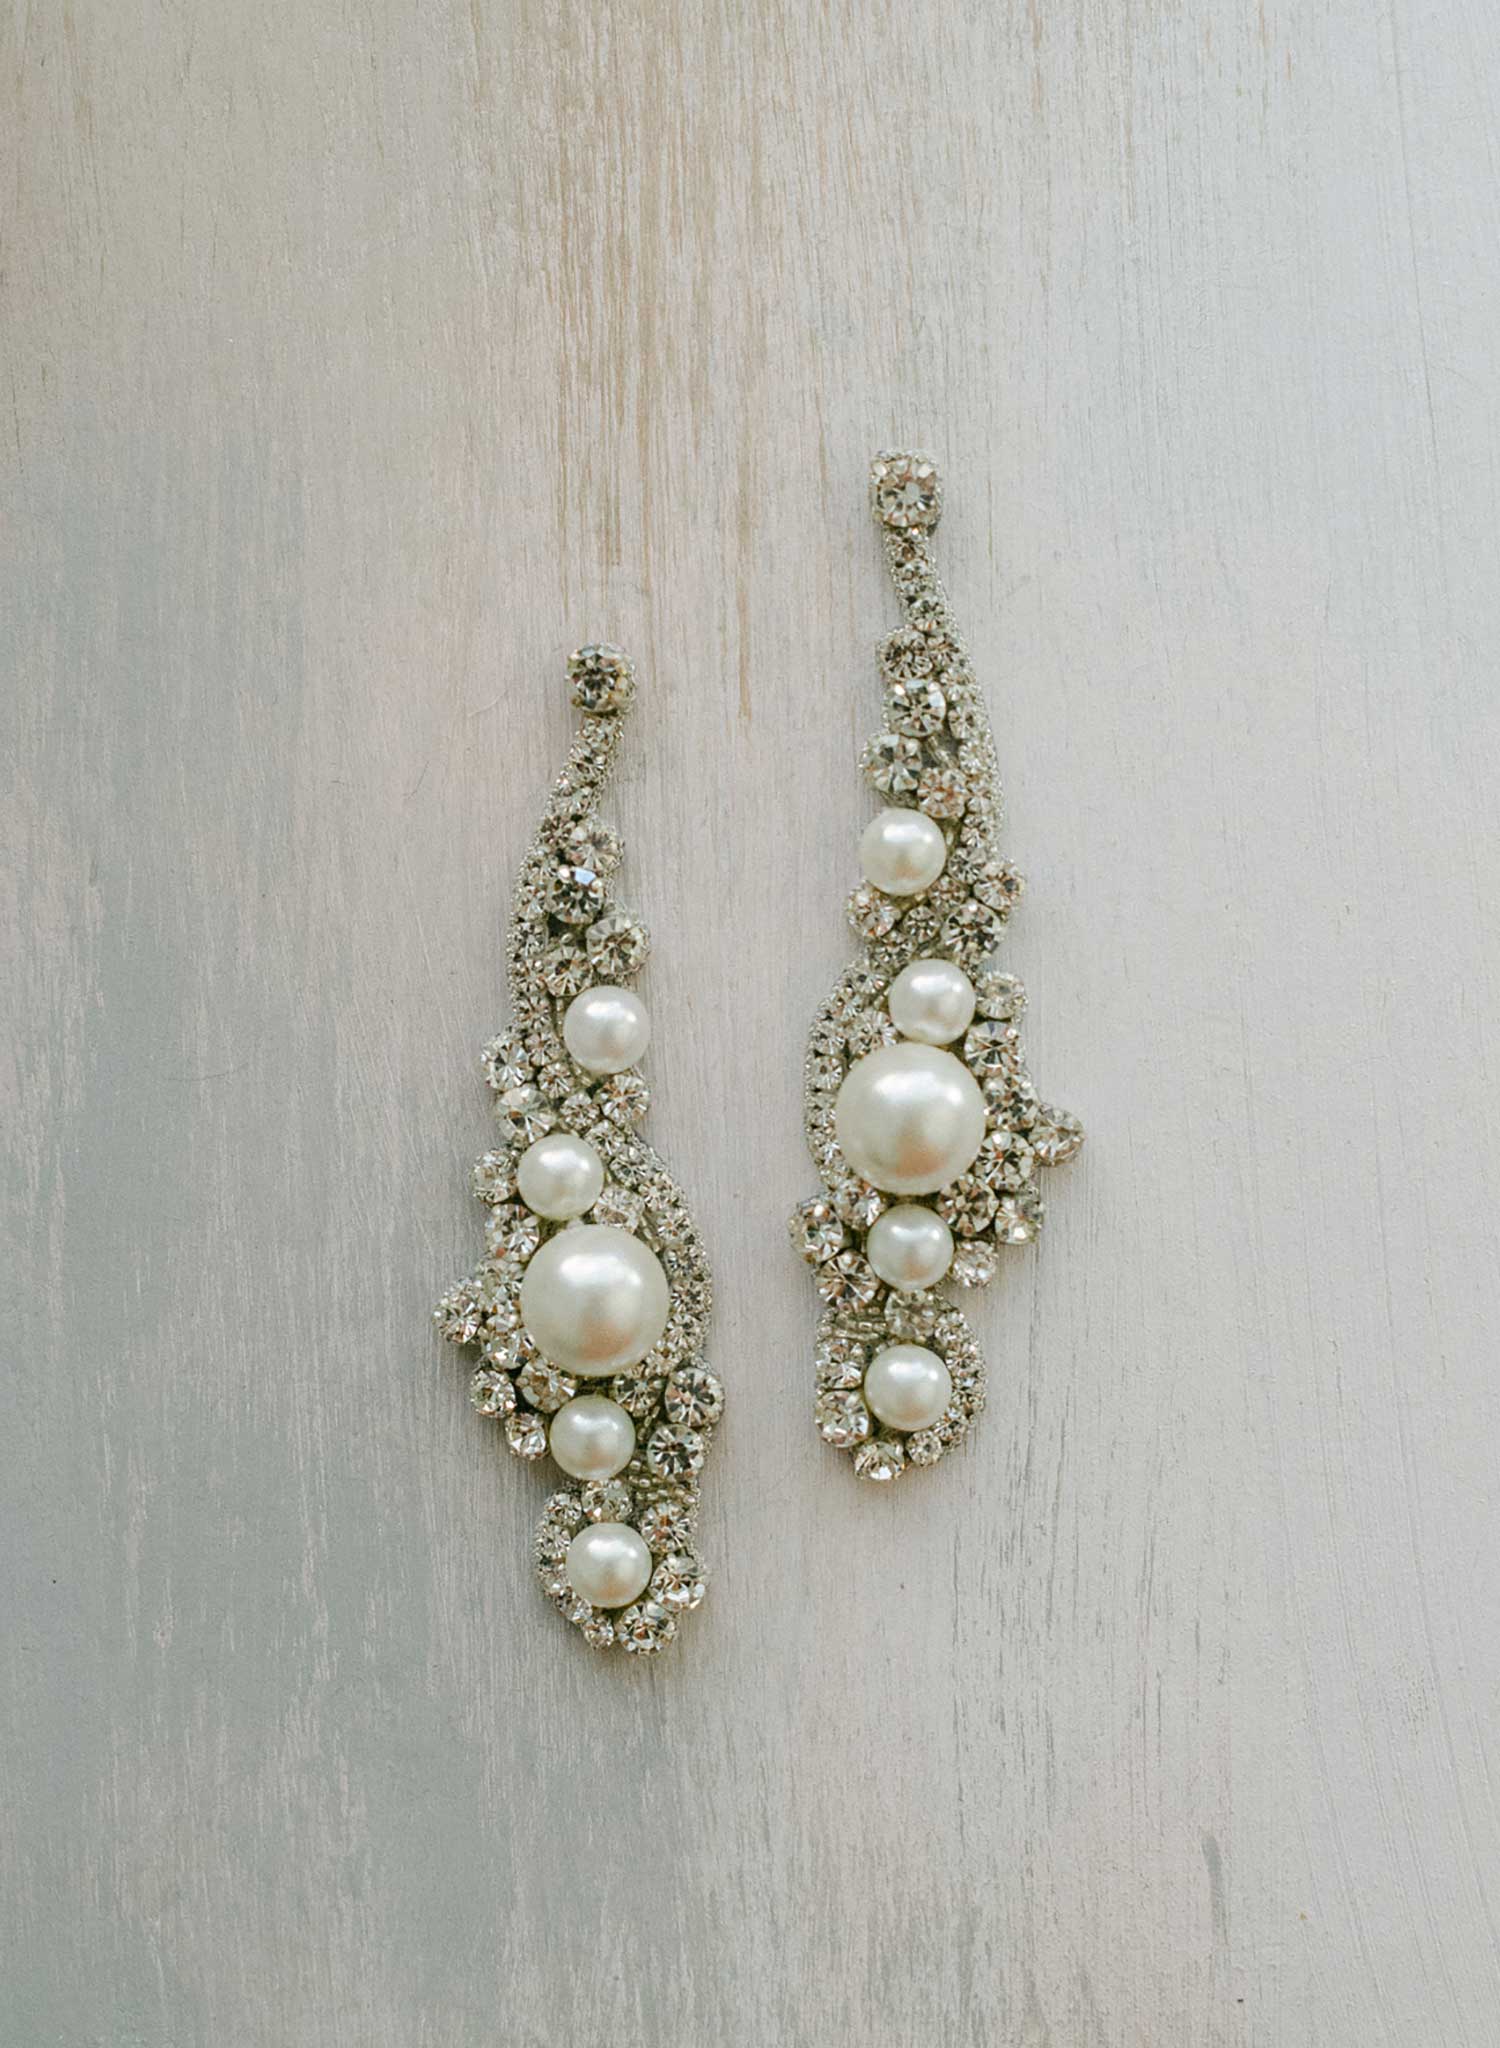 Crystal wrapped pearl earrings - Style #2432